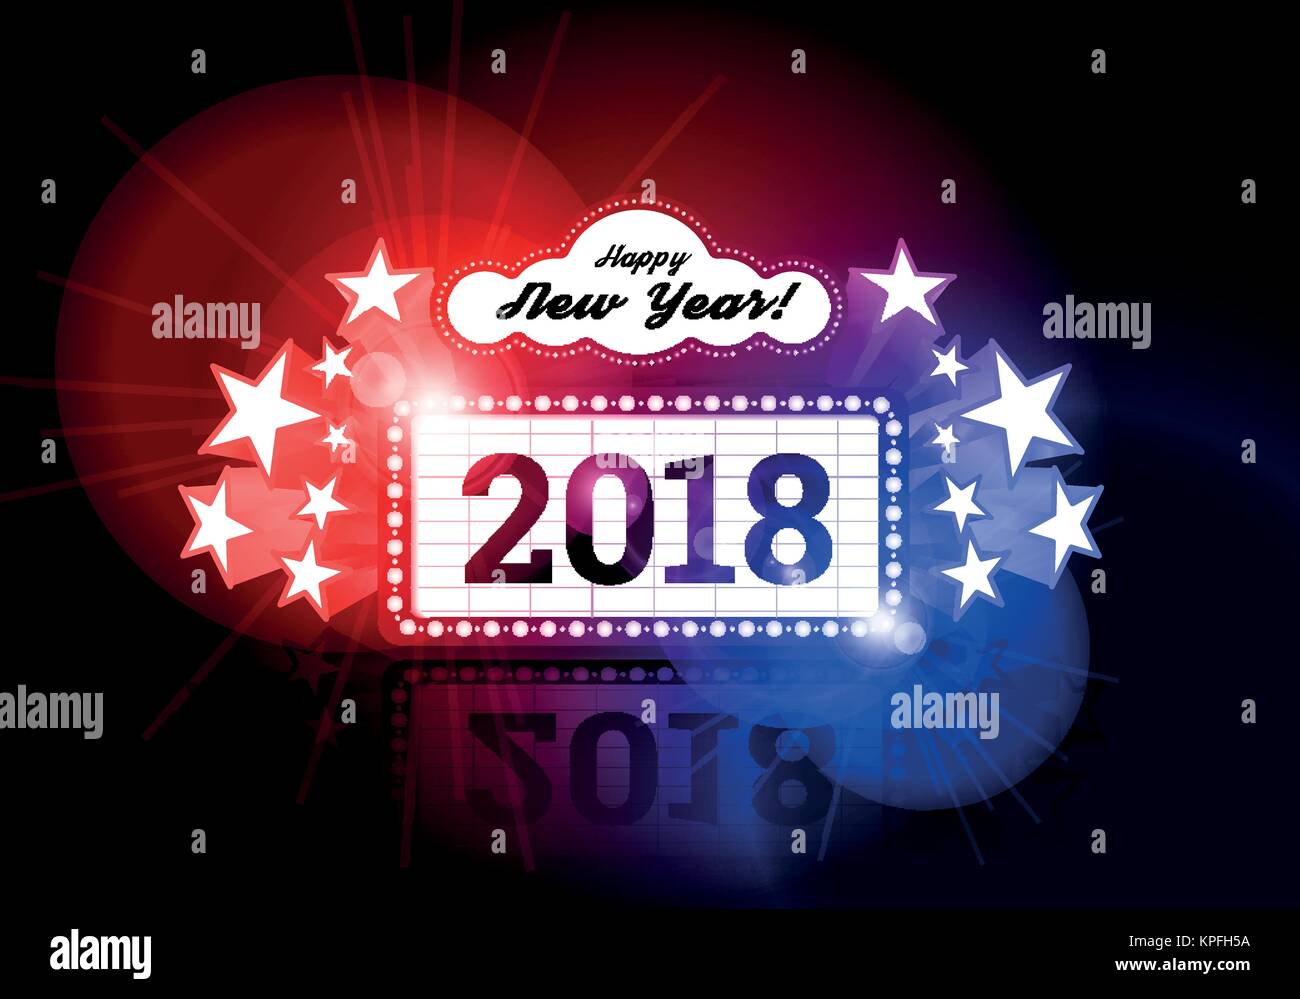 New Year marquee 2018 Stock Vector